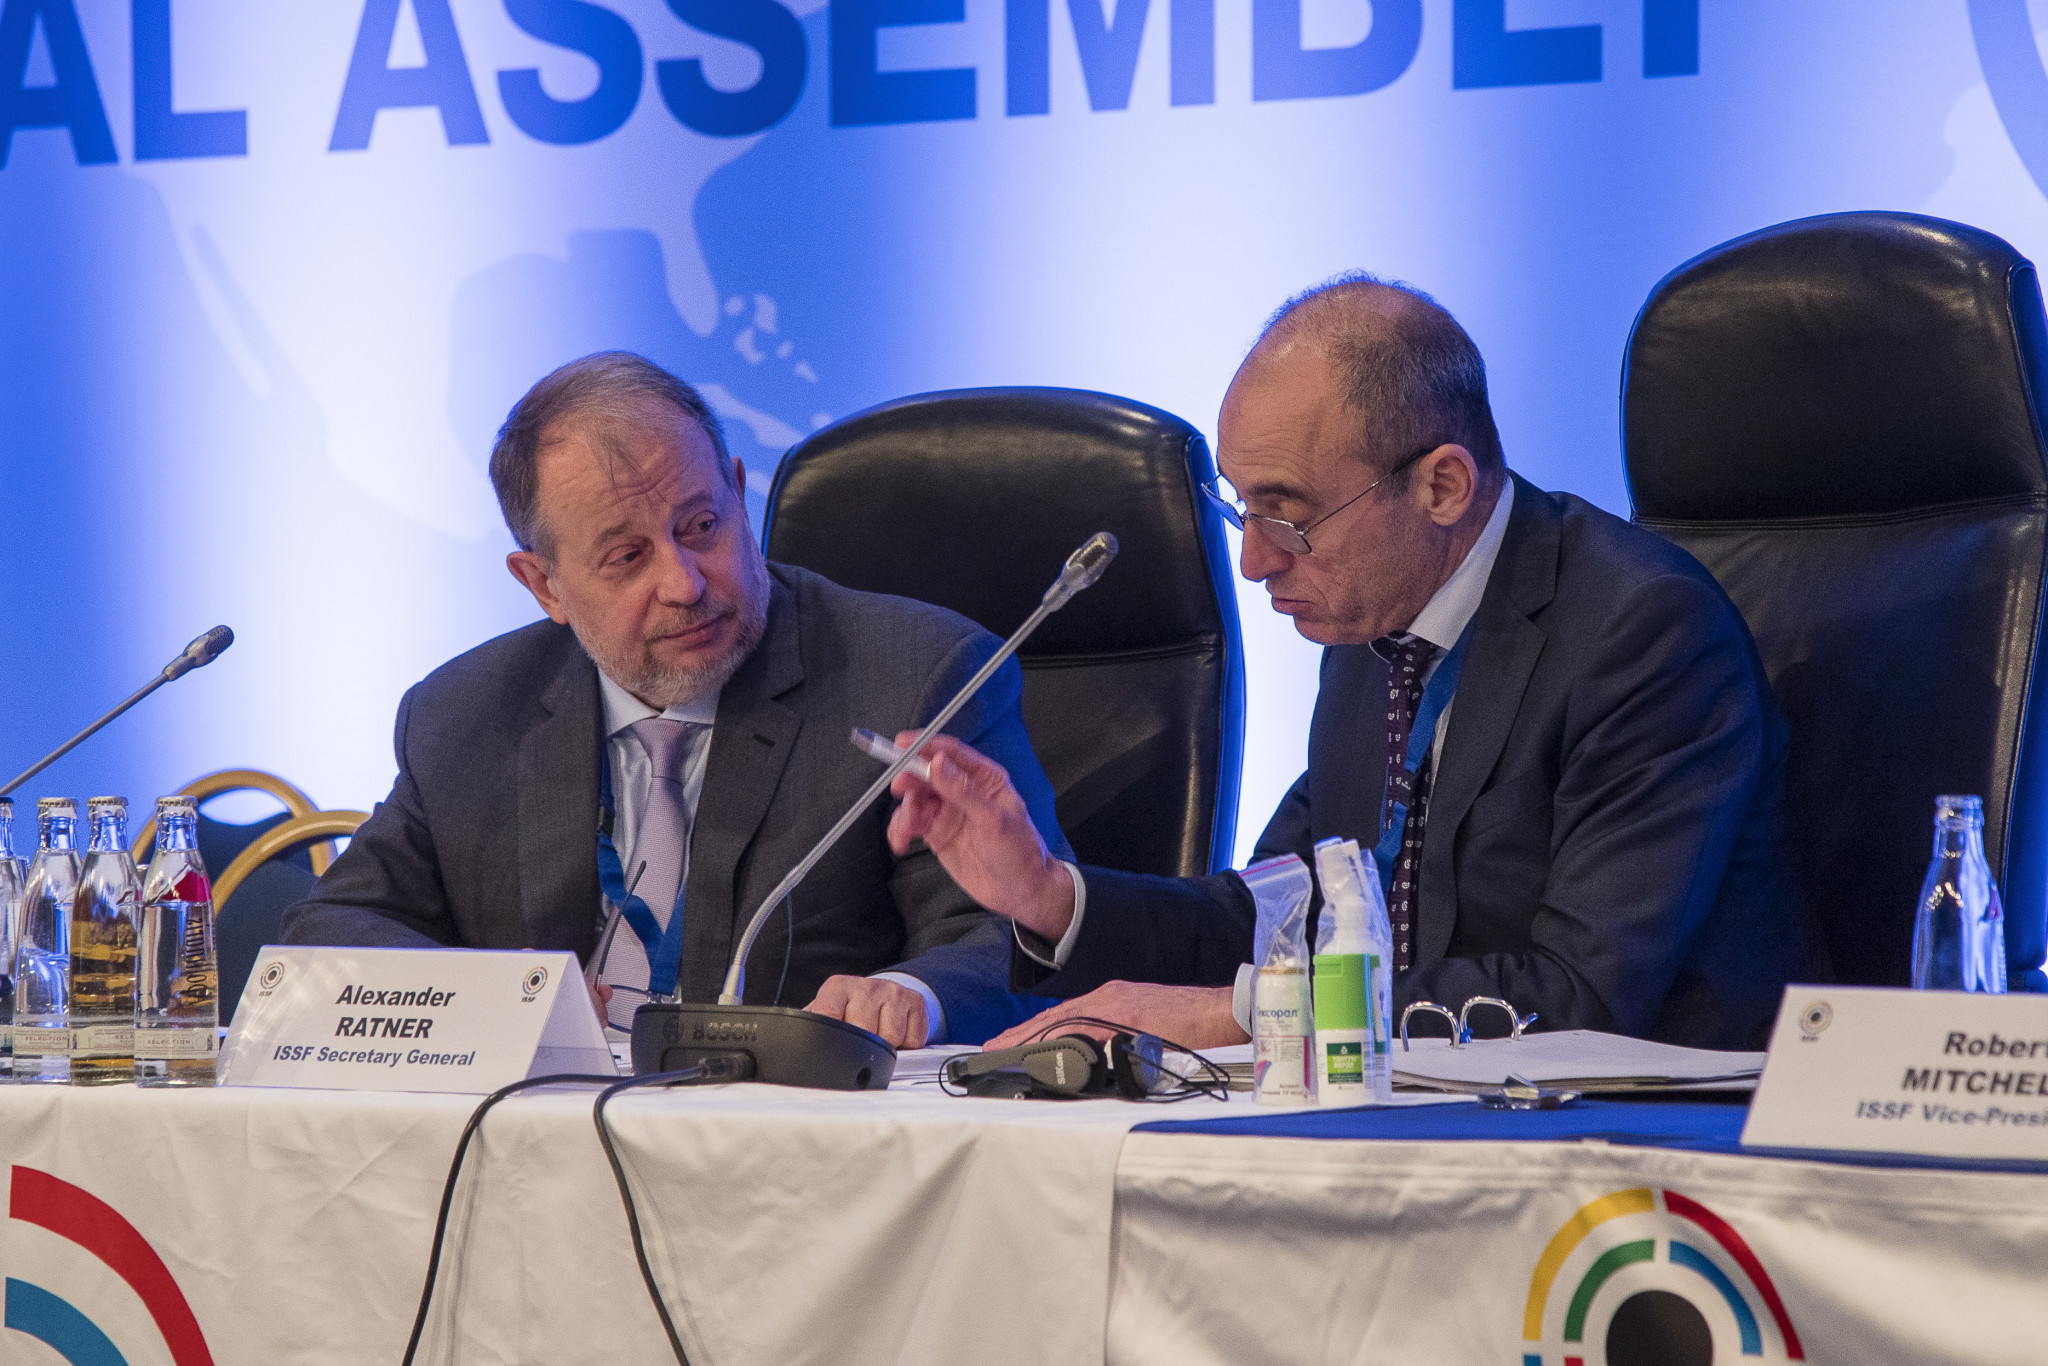 The ISSF is dominated at the top by Russian officials with Alexander Ratner, right, serving as secretary general alongside Vladimir Lisin, left, as President ©ISSF